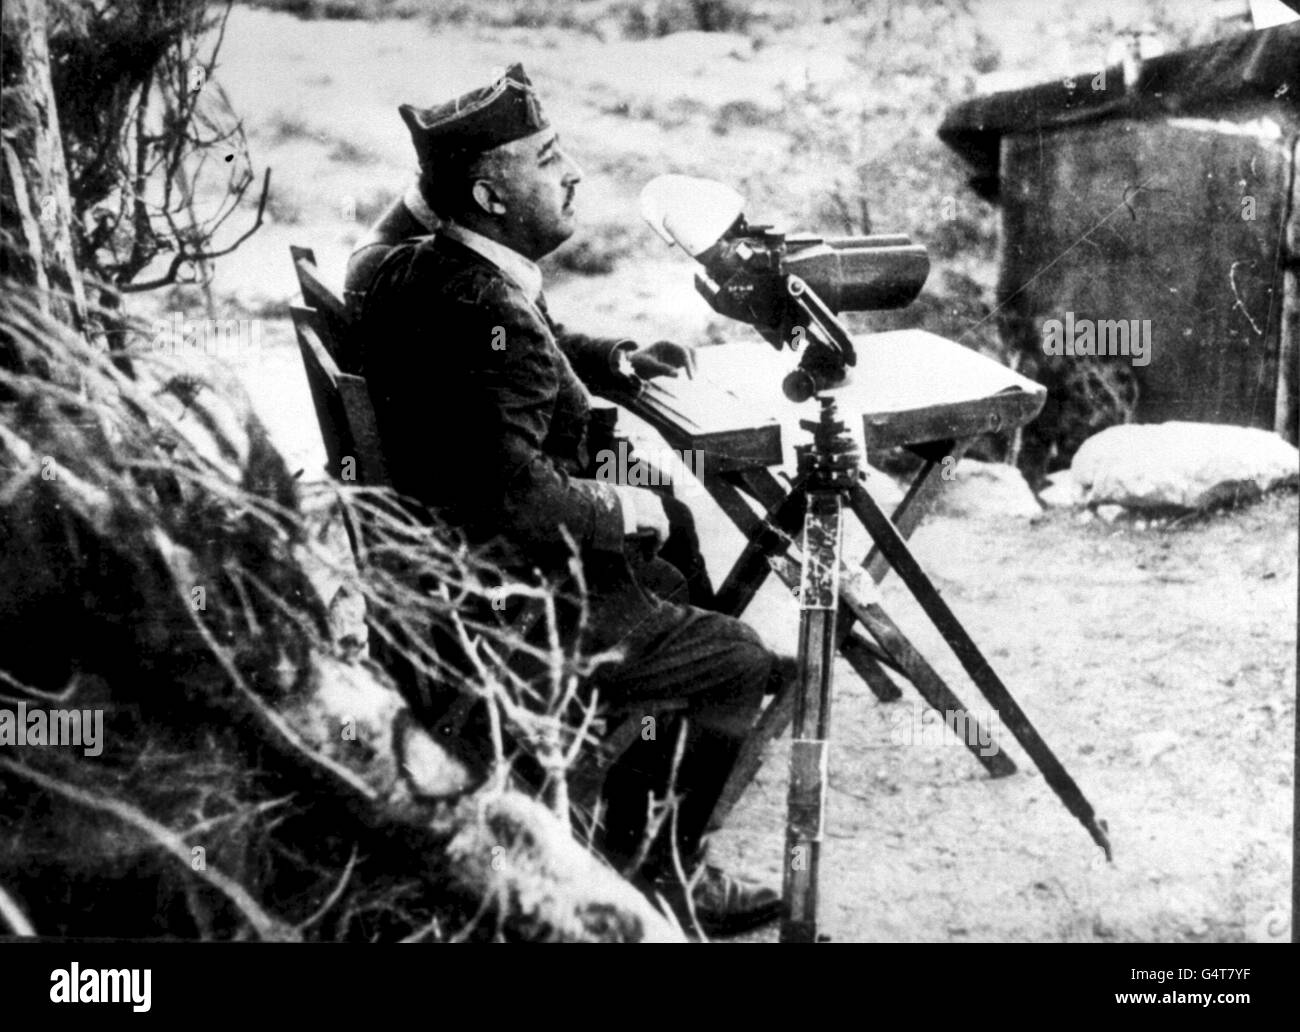 18TH JULY: The Spanish Civil War begins, with General Francisco Franco leading the uprising. c1936: General Francisco Franco, Commander of the Fascist forces in the Spanish Civil War of 1936-1939, seated with binoculars at the Front. Stock Photo